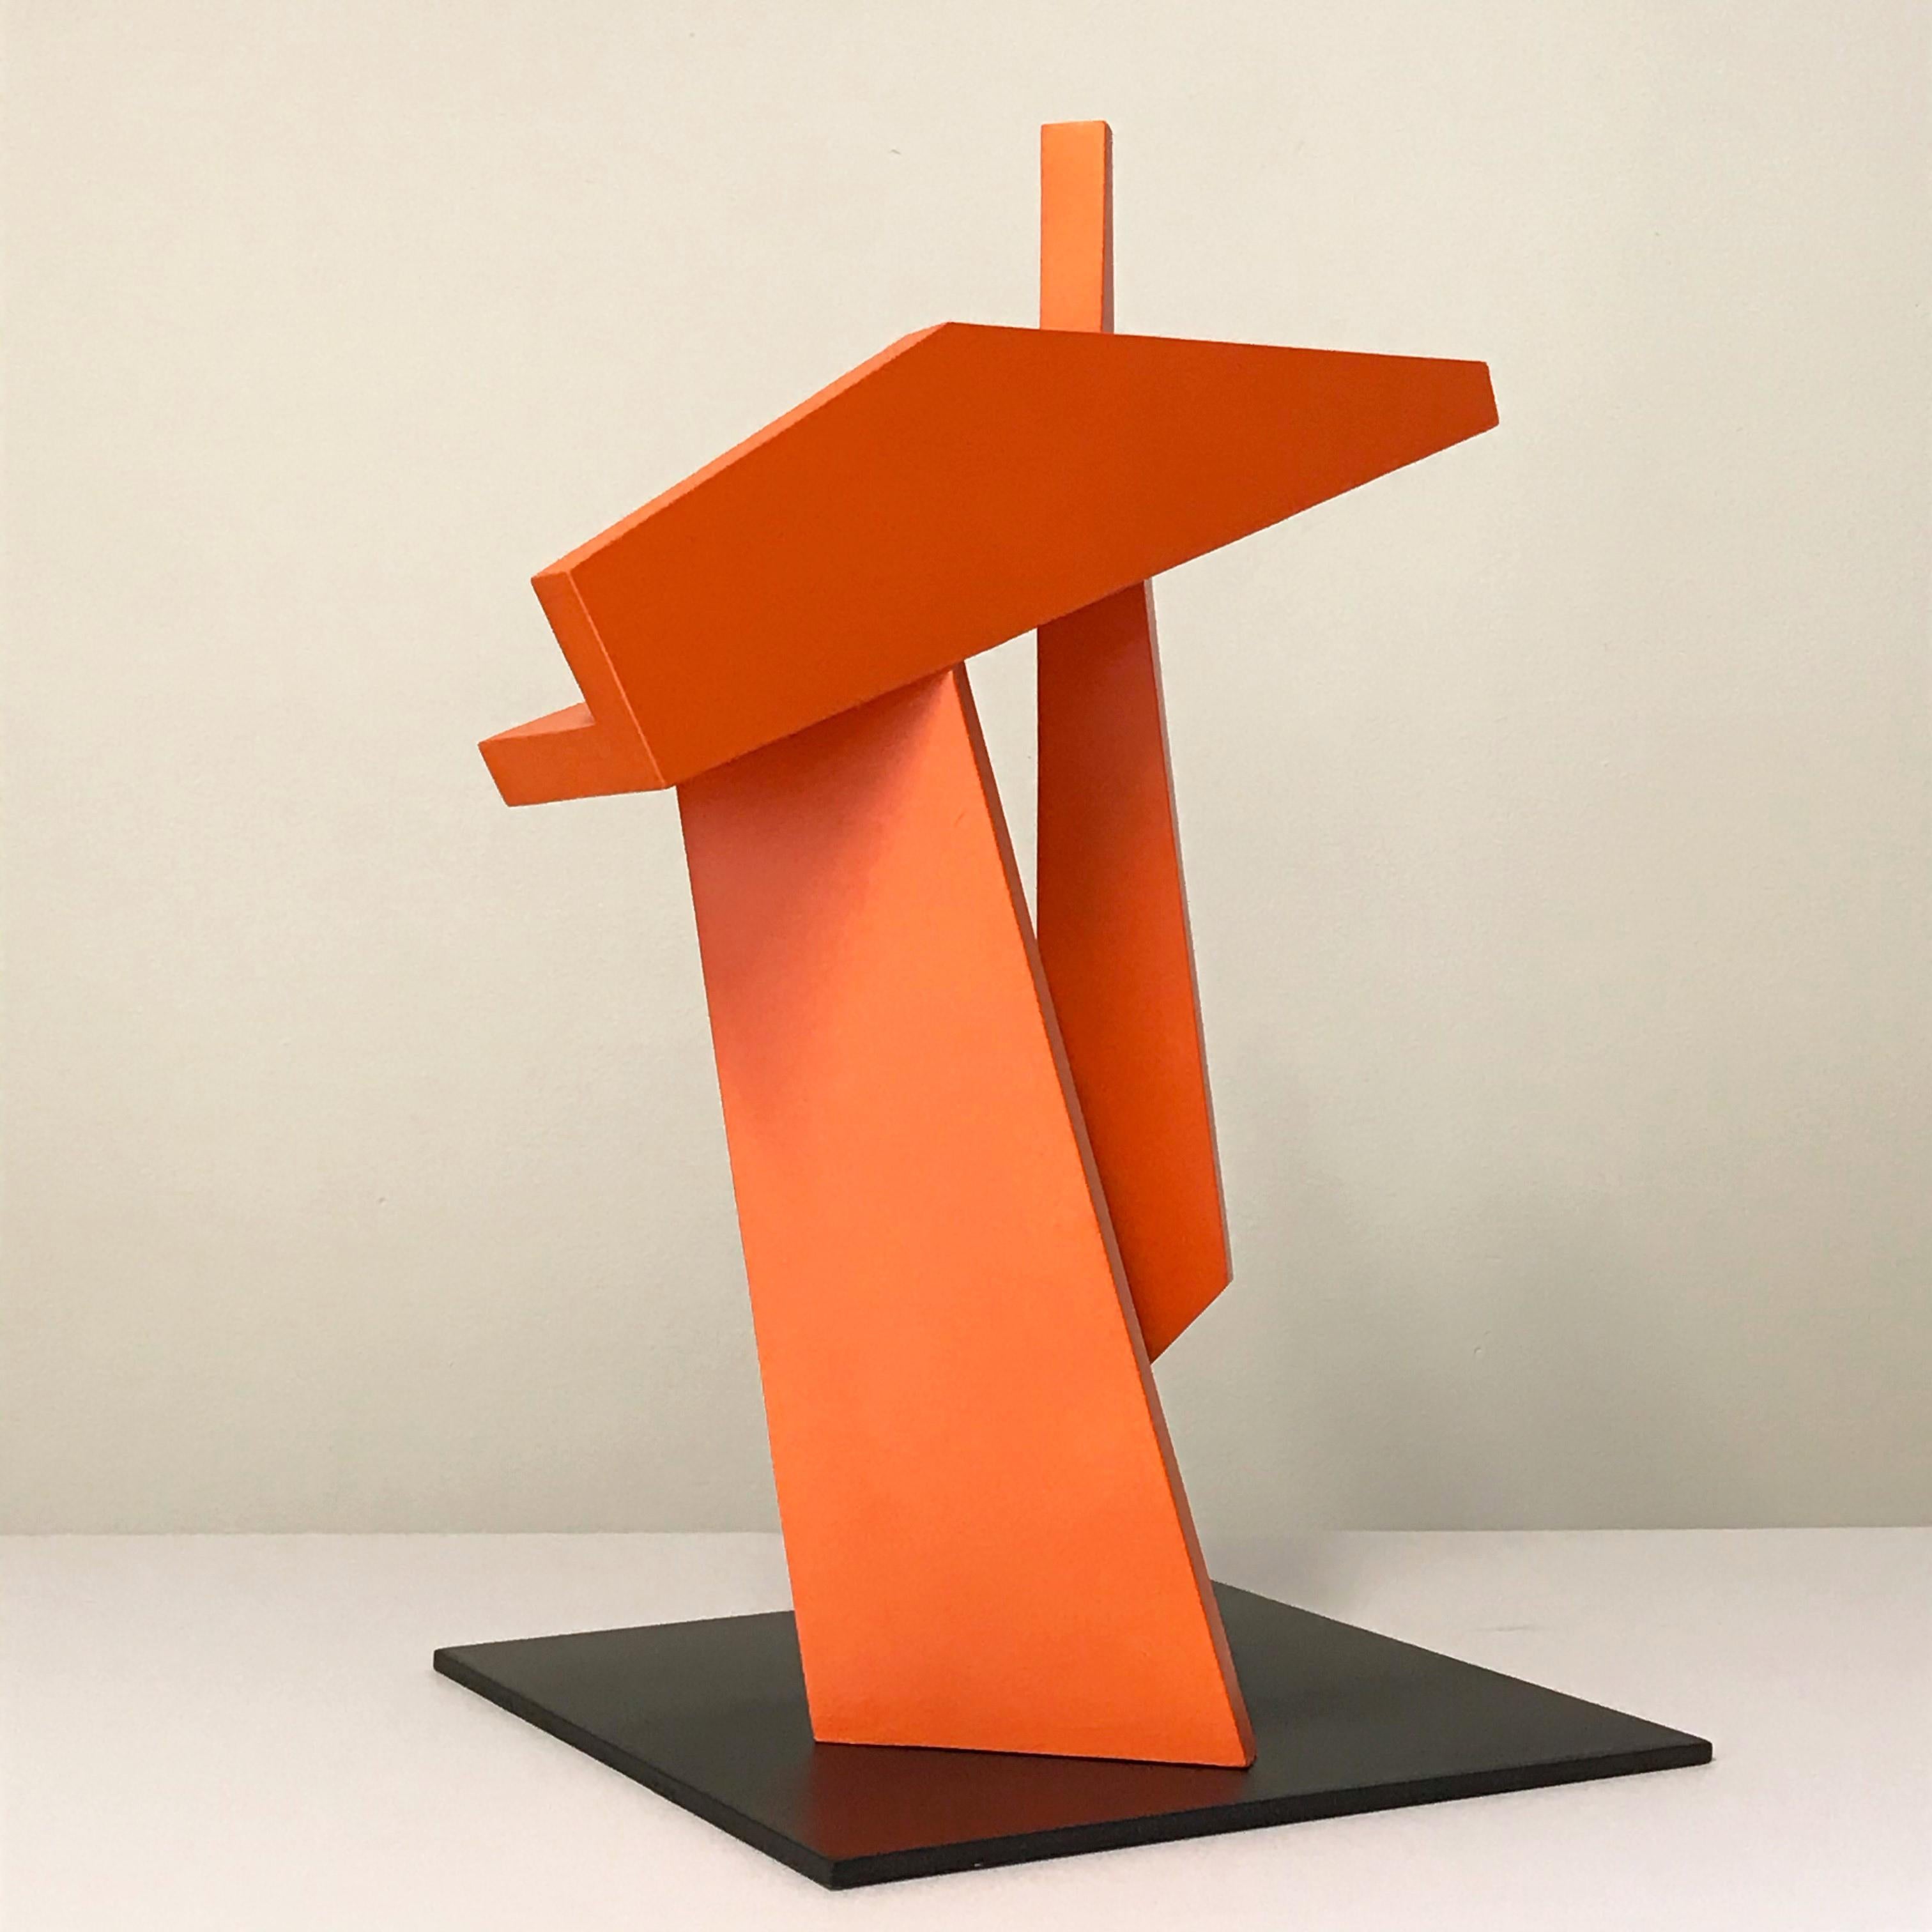 Minimalist Abstract Geometric standing sculpture in bright red orange with a black steel base
